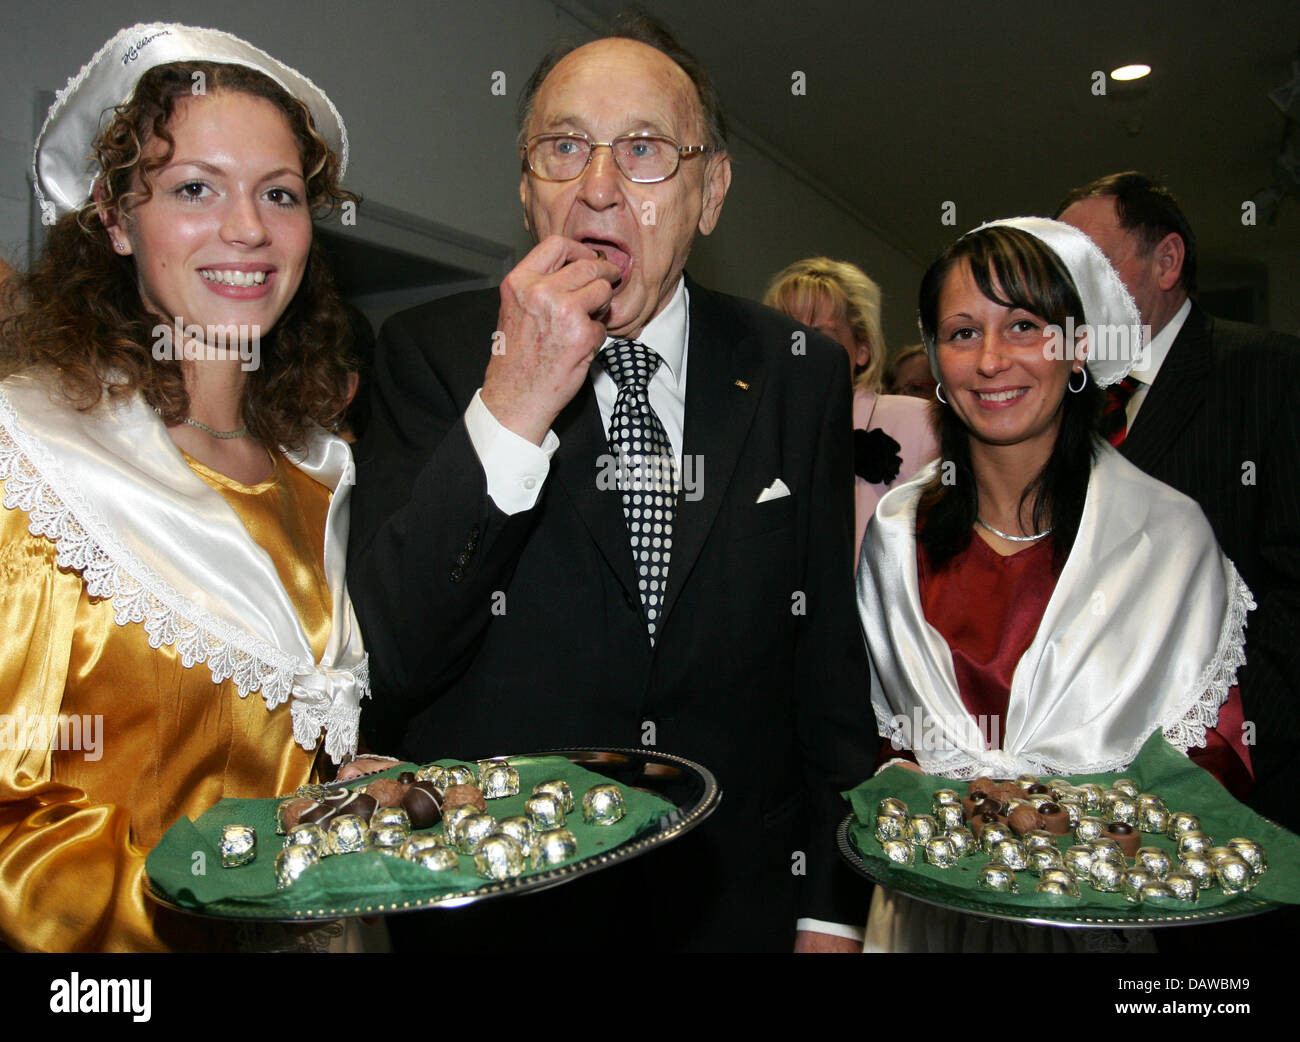 The former German Foreign Minister Hans-Dietrich Genscher (C) eats 'Halloren-Kugeln' sweets presented to him by Juliane (L) and Julia after the ceremony in honour of his 80th birthday at the 'Franckesche Stiftung' in Halle/Saale, Germany, Friday, 23 March 2007. Genscher was born 1927 in Halle. His birthplace shall be converted to a Stock Photo